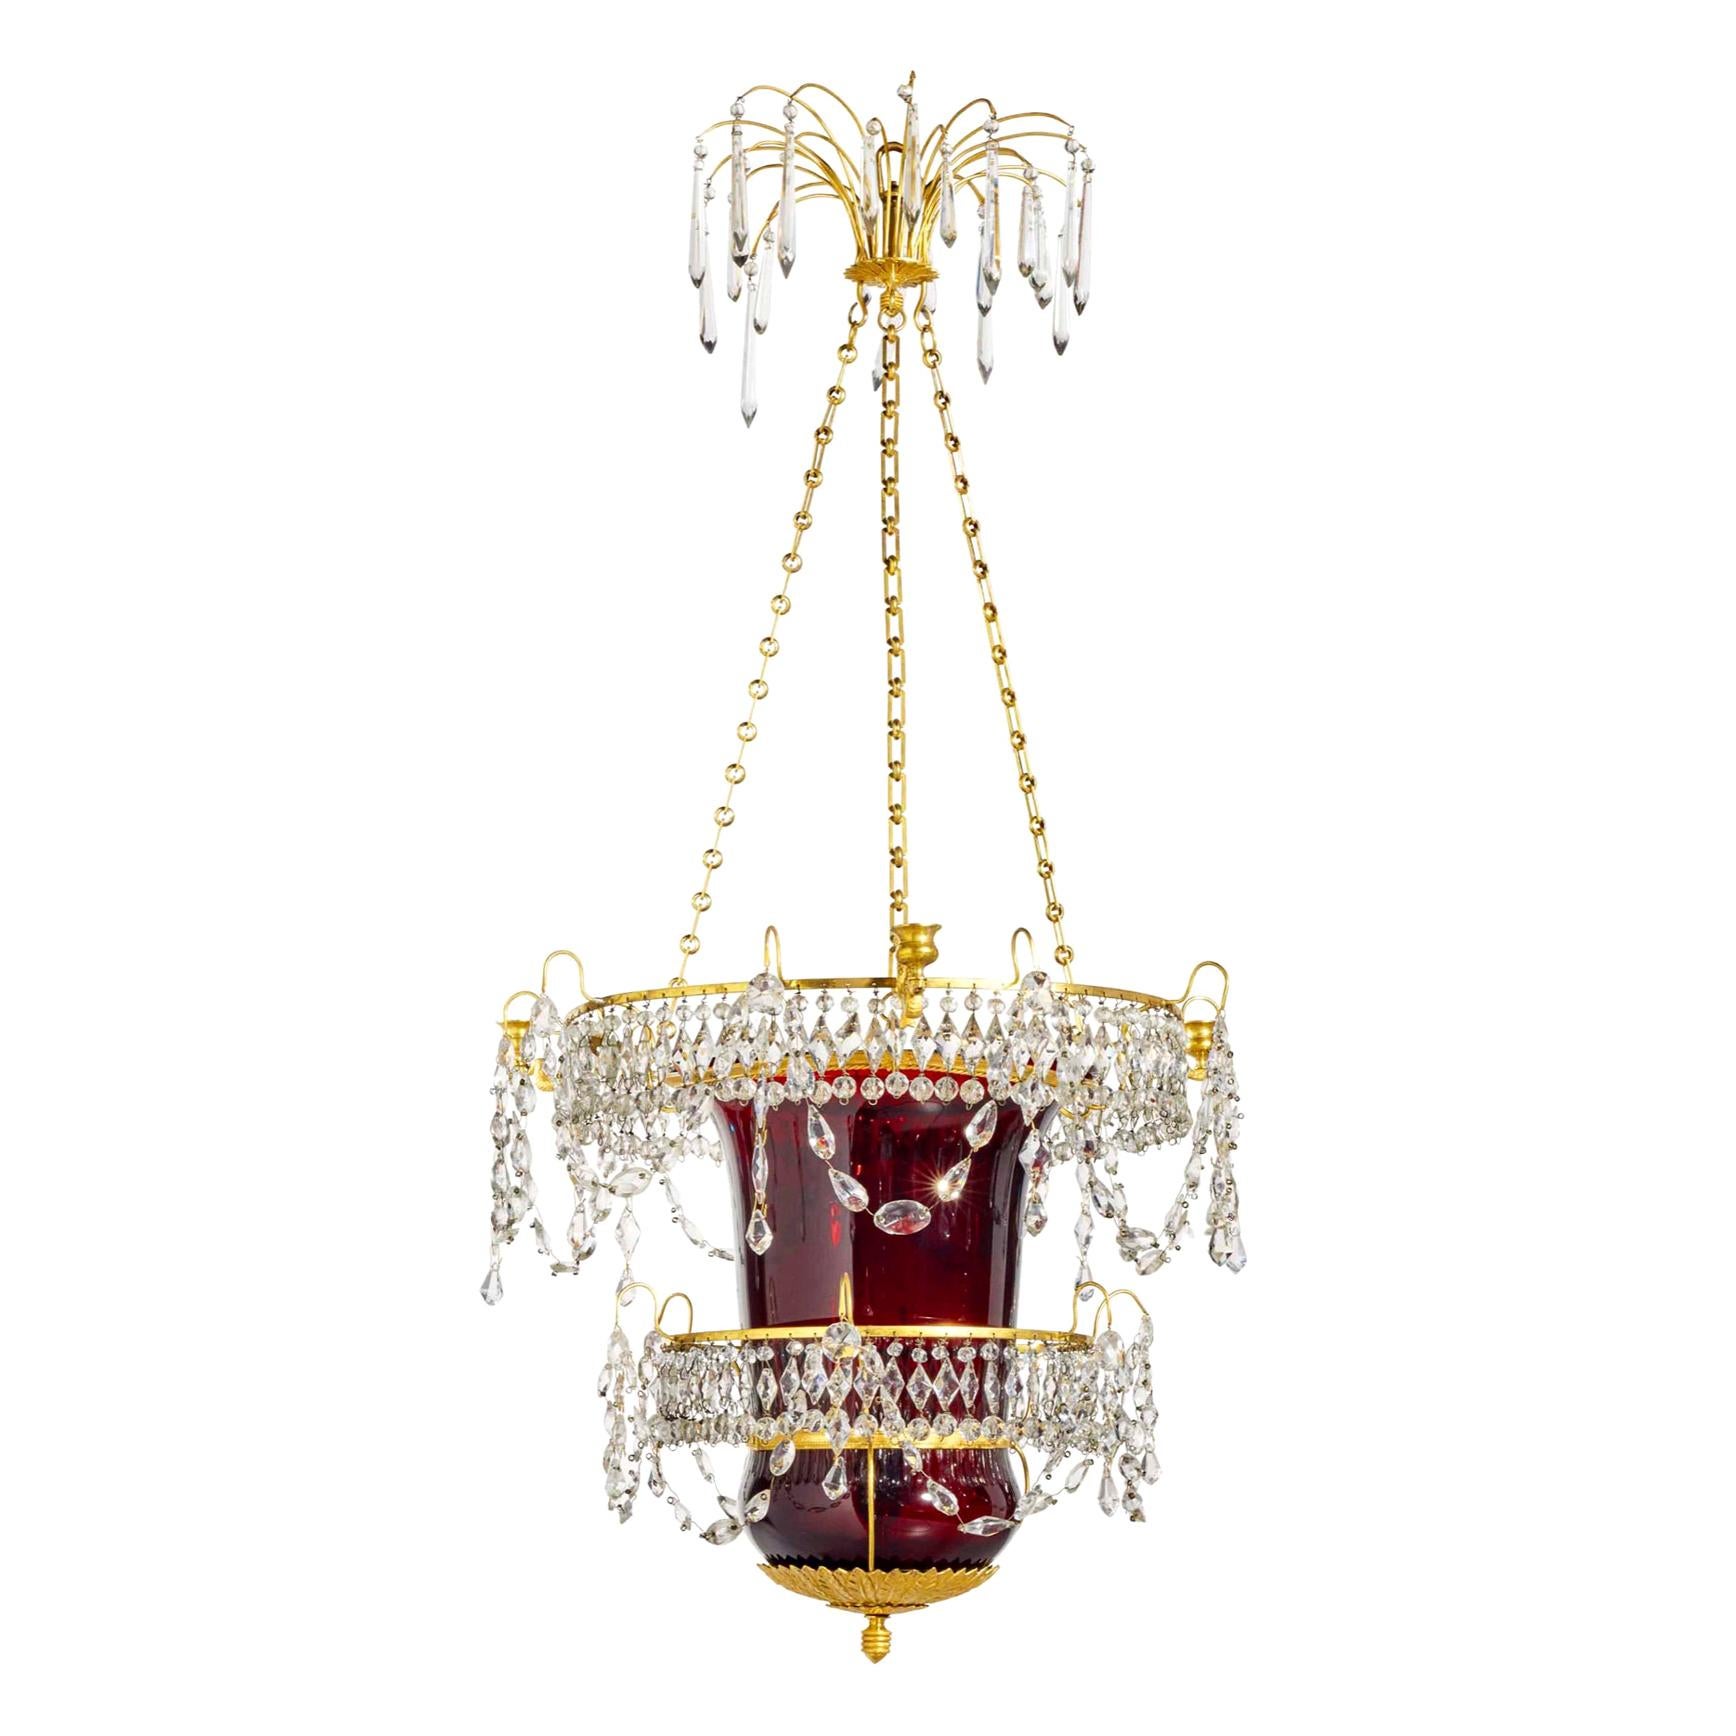 Early 19th Century Neoclassical Russian Ormolu and Ruby Glass Lantern Chandelier